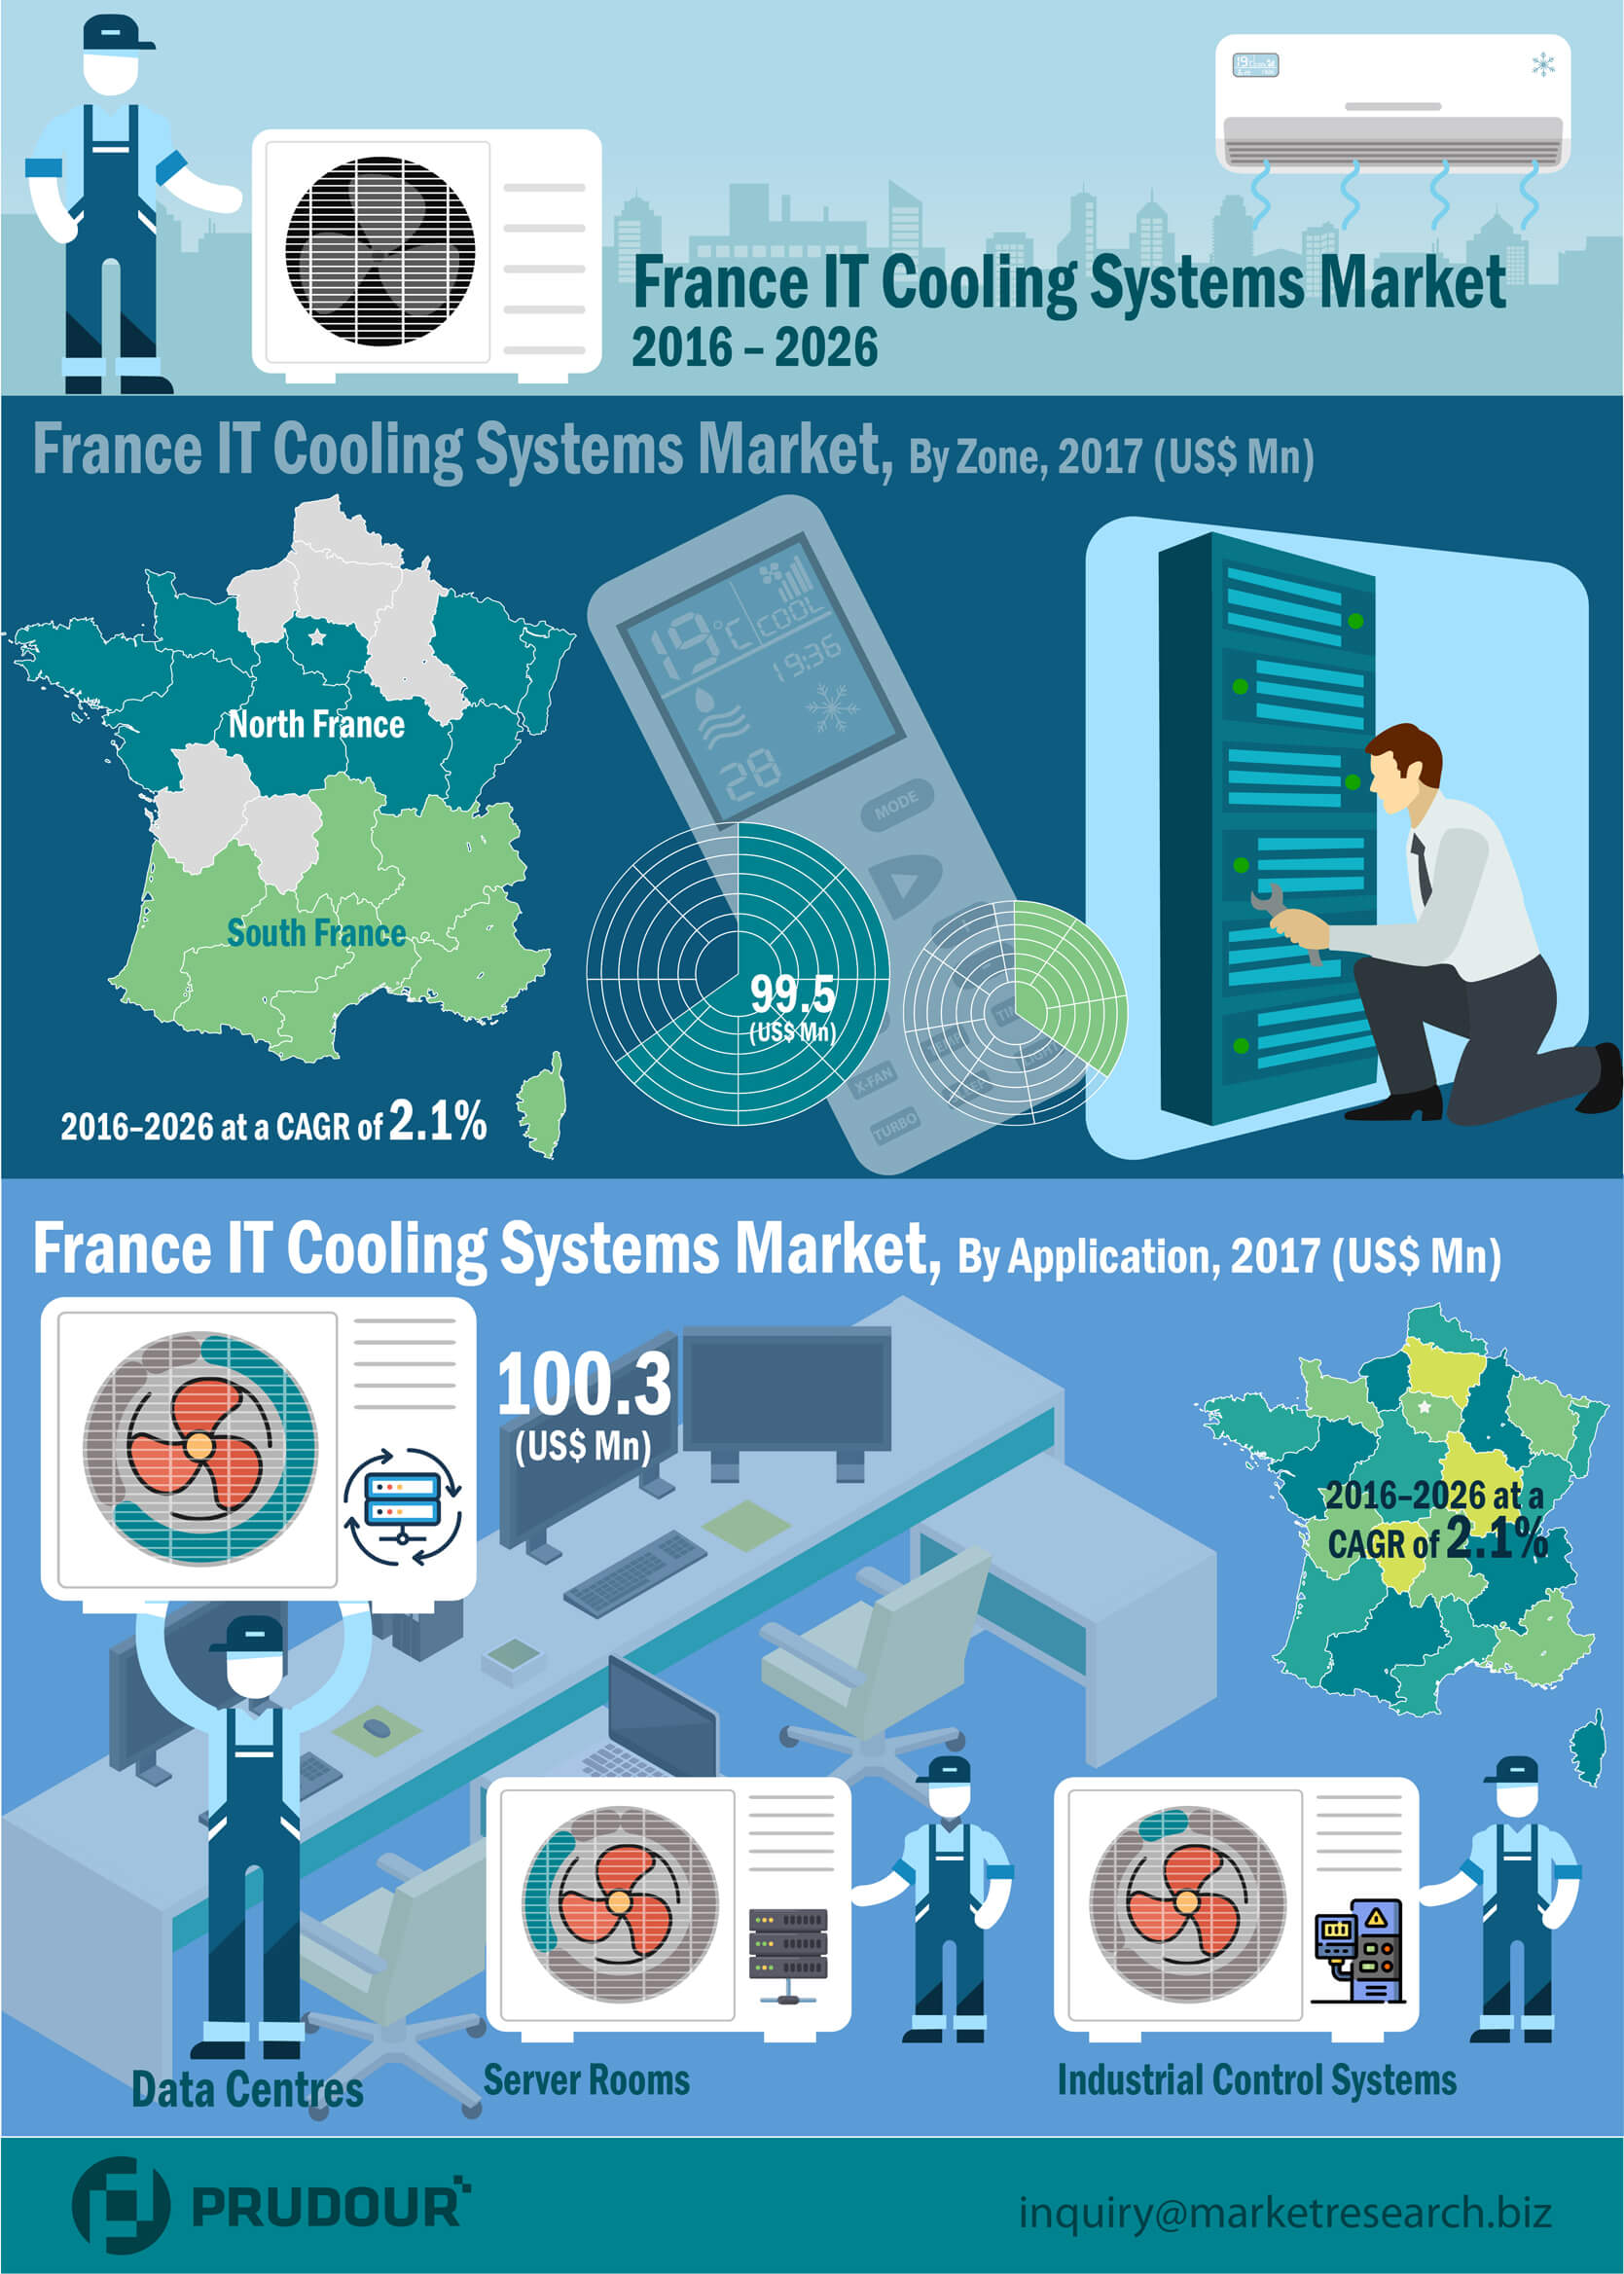 france-IT-cooling-market-infographic